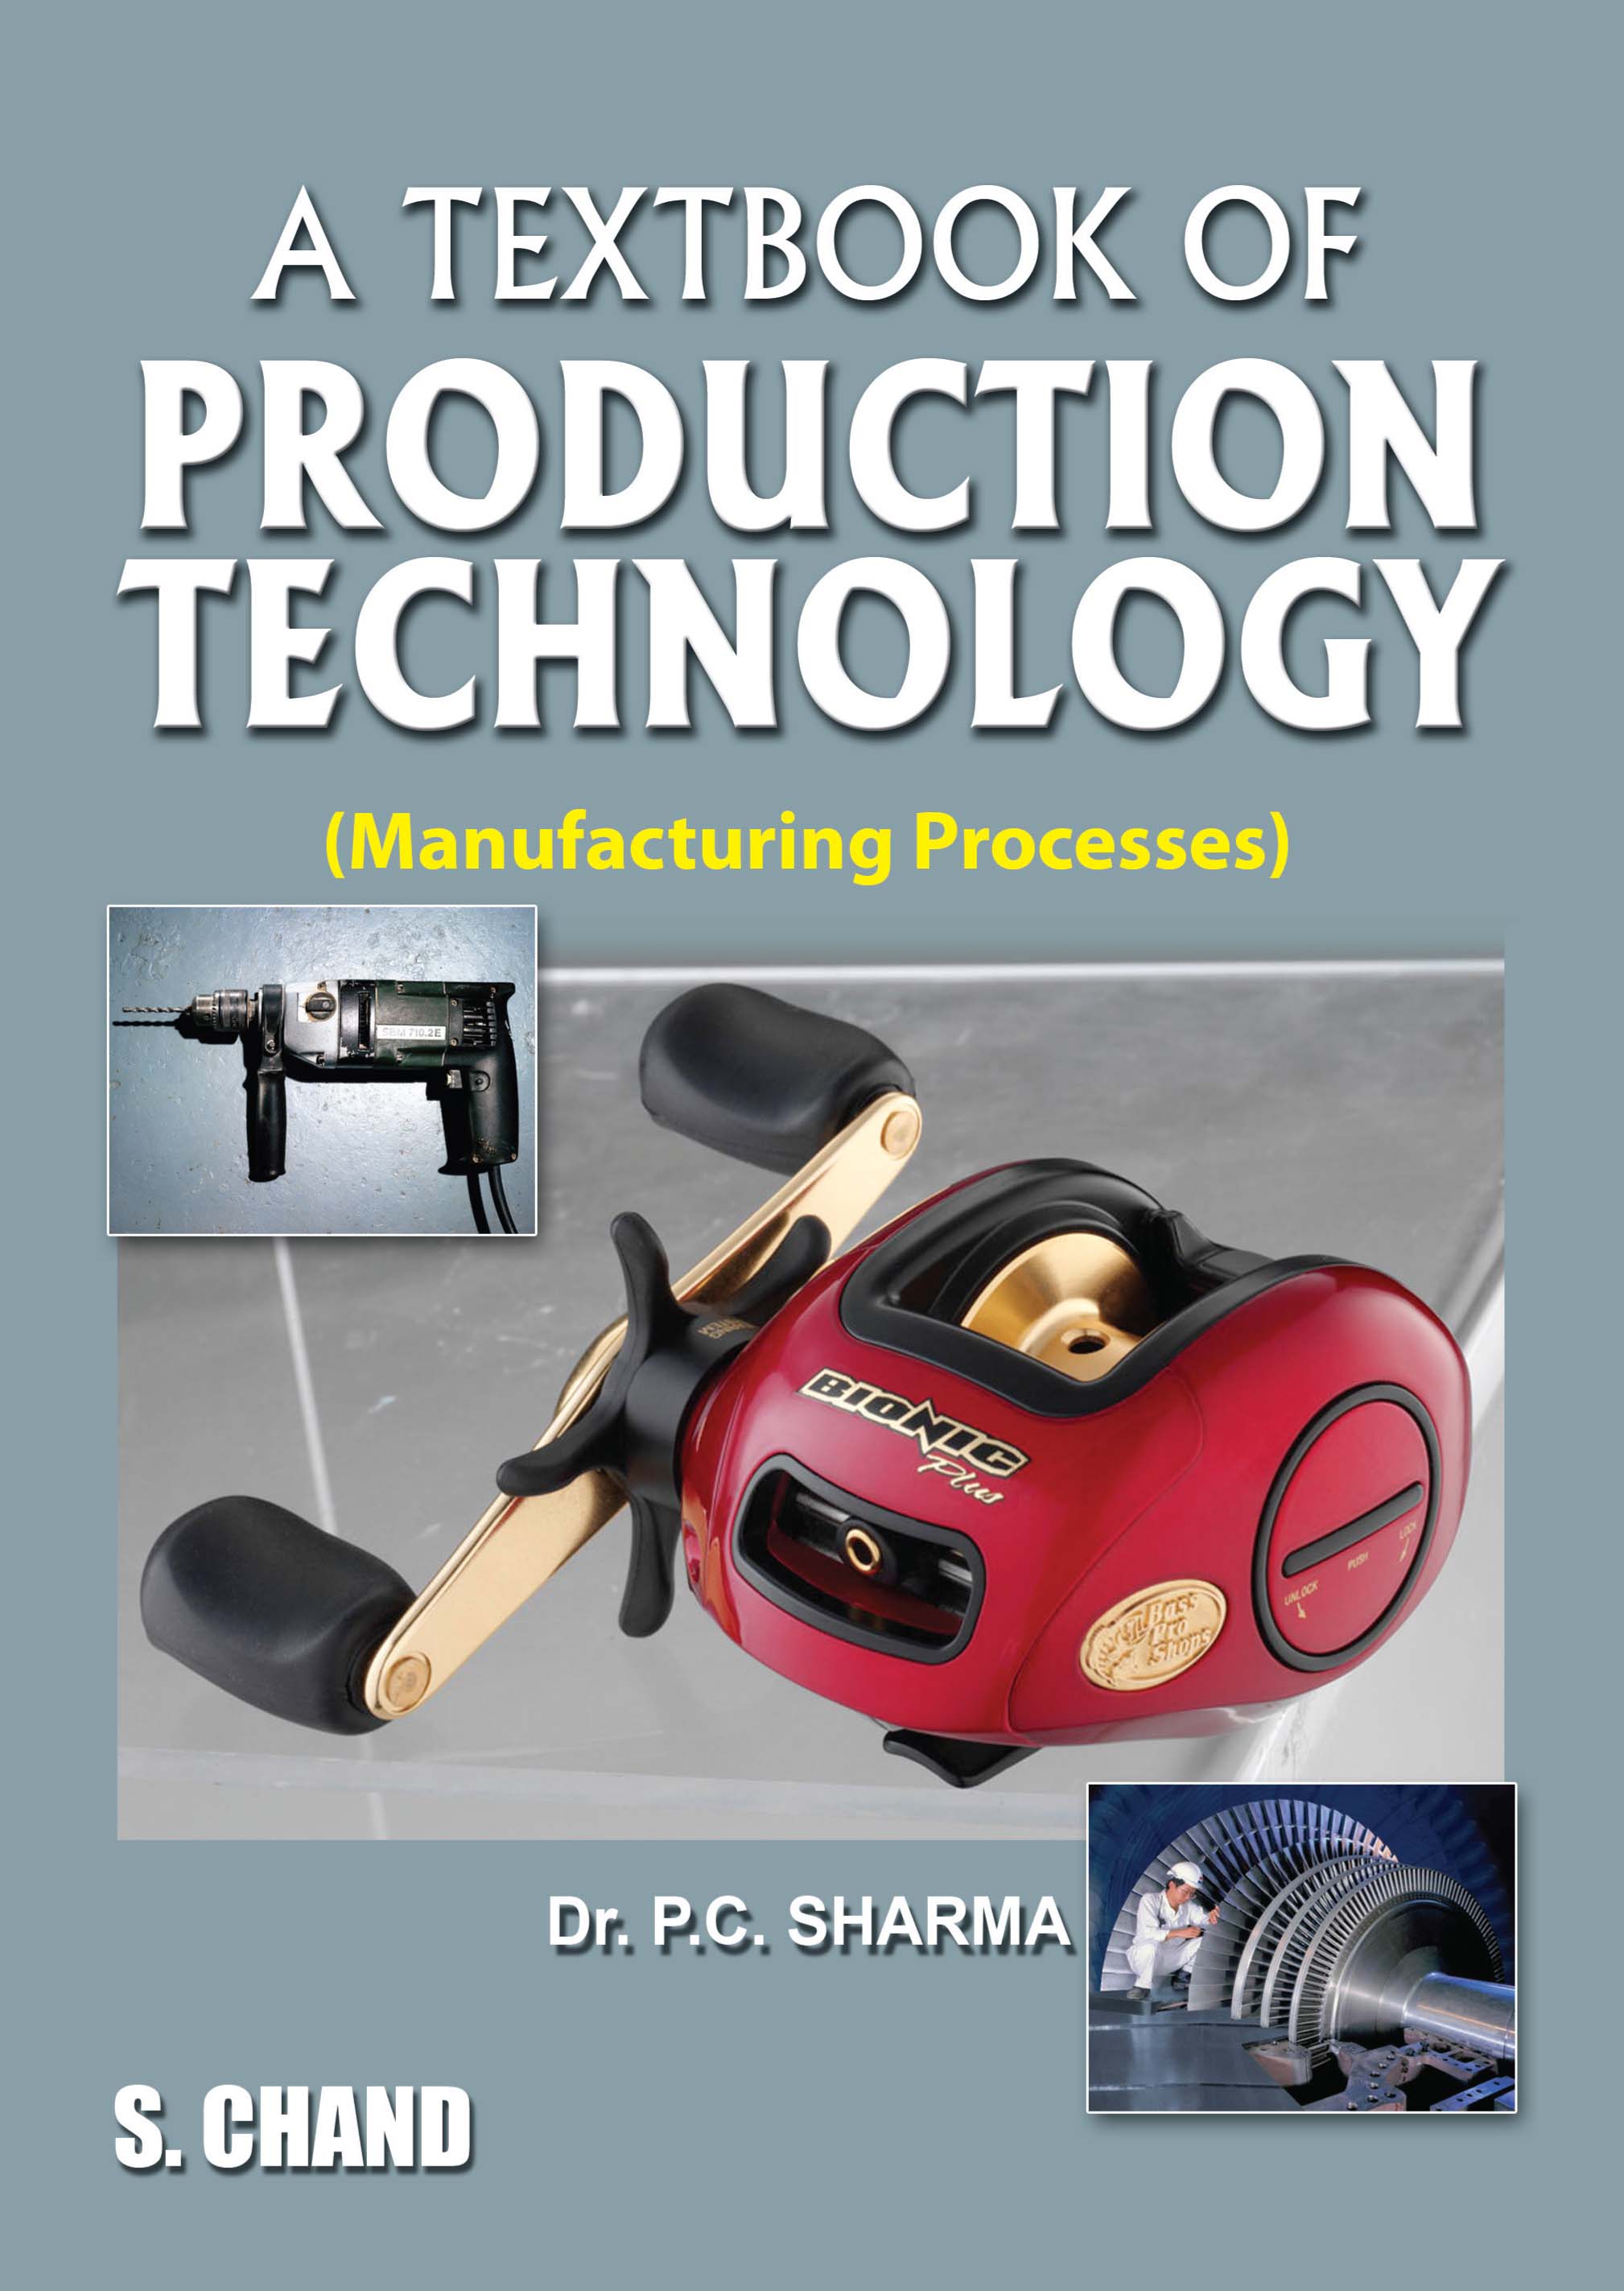 A TEXTBOOK OF PRODUCTION TECHNOLOGY (MANUFACTURING PROCESSES)